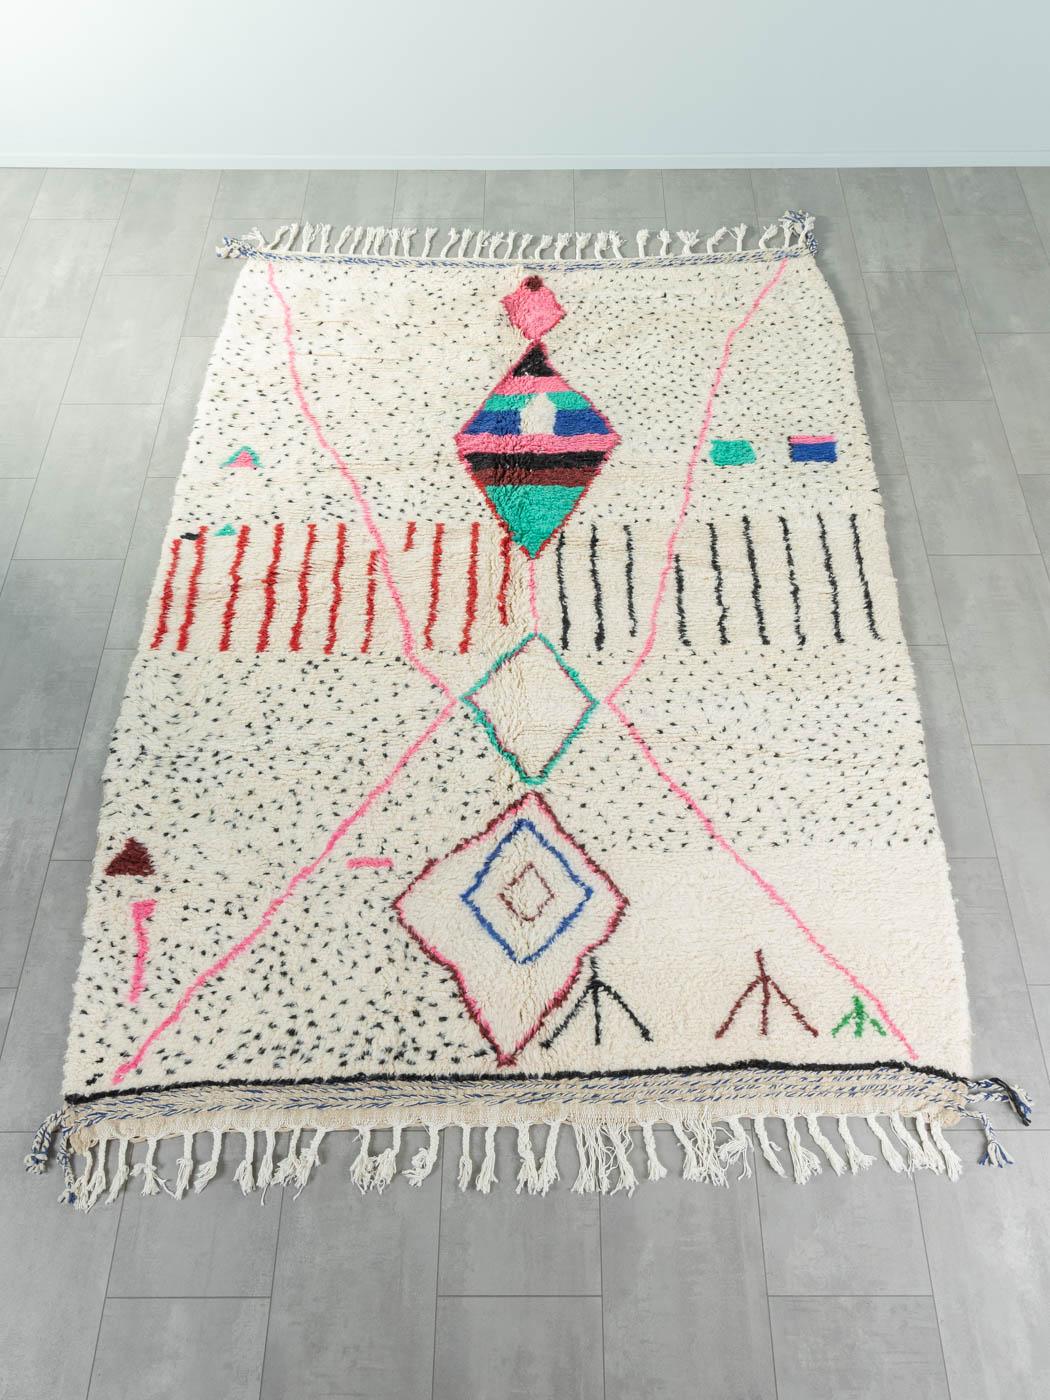 Impromptu is a contemporary 100% wool rug – thick and soft, comfortable underfoot. Our Berber rugs are handwoven and handknotted by Amazigh women in the Atlas Mountains. These communities have been crafting rugs for thousands of years. One knot at a